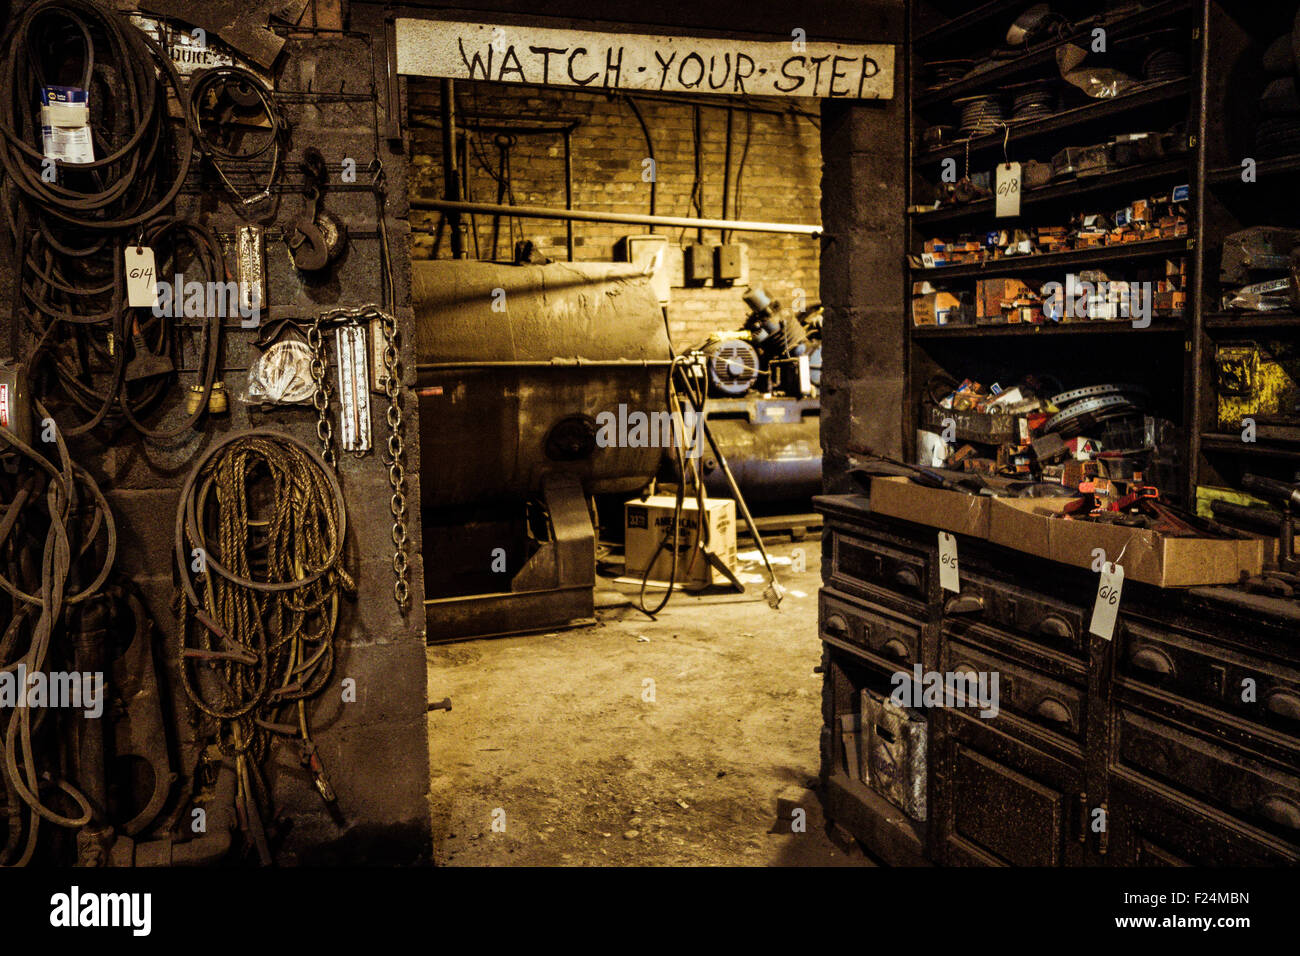 Equipment and parts are everywhere around a doorway into a boiler room, above which a sign warns 'Watch Your Step' Stock Photo